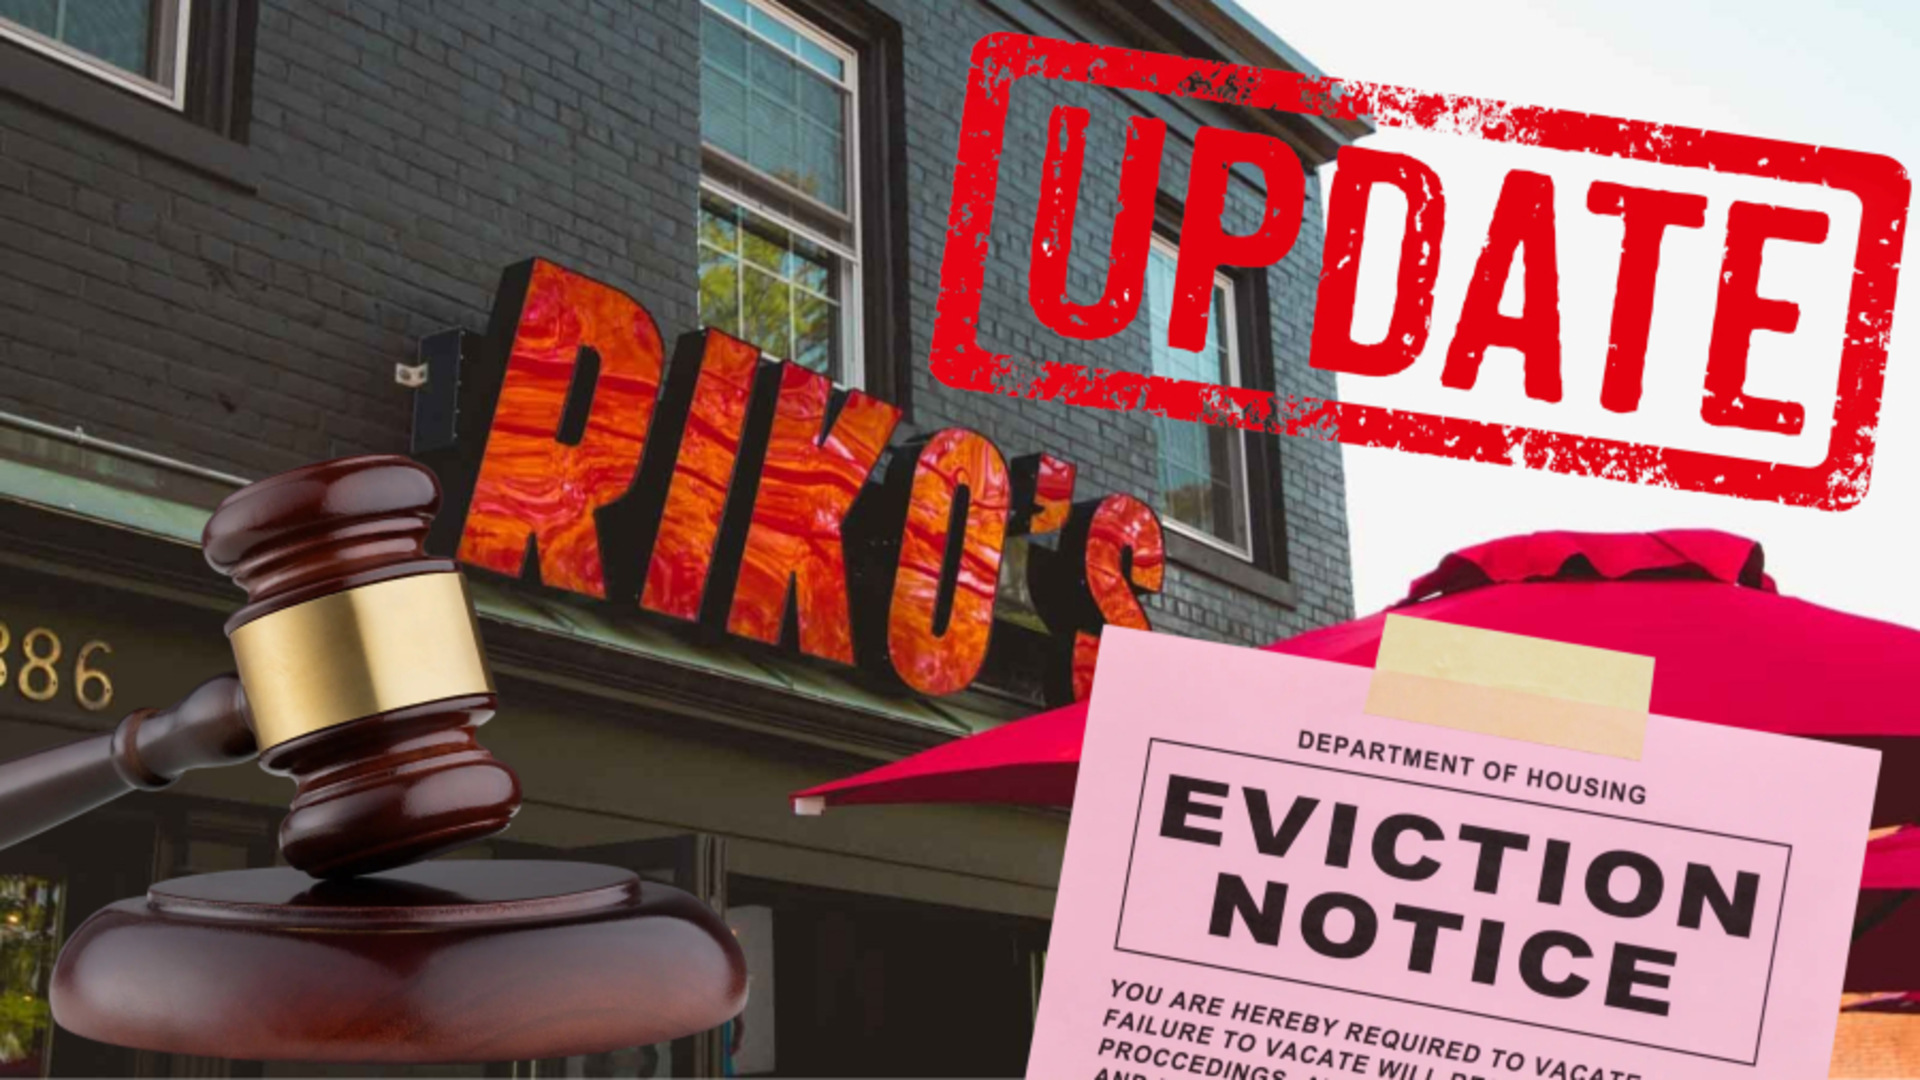 Rikos-Pizza-Stamford-Victory-Court-Ruling-Against-Eviction-Hot-Oil-Thin-Crust-Expansion-Connecticut-Superior-Court BISTRO BUDDY - Article - BISTRO BUDDY | Food & Drink Community Network Registered Users, BISTRO BUDDY BISTRO BUDDY's Profile